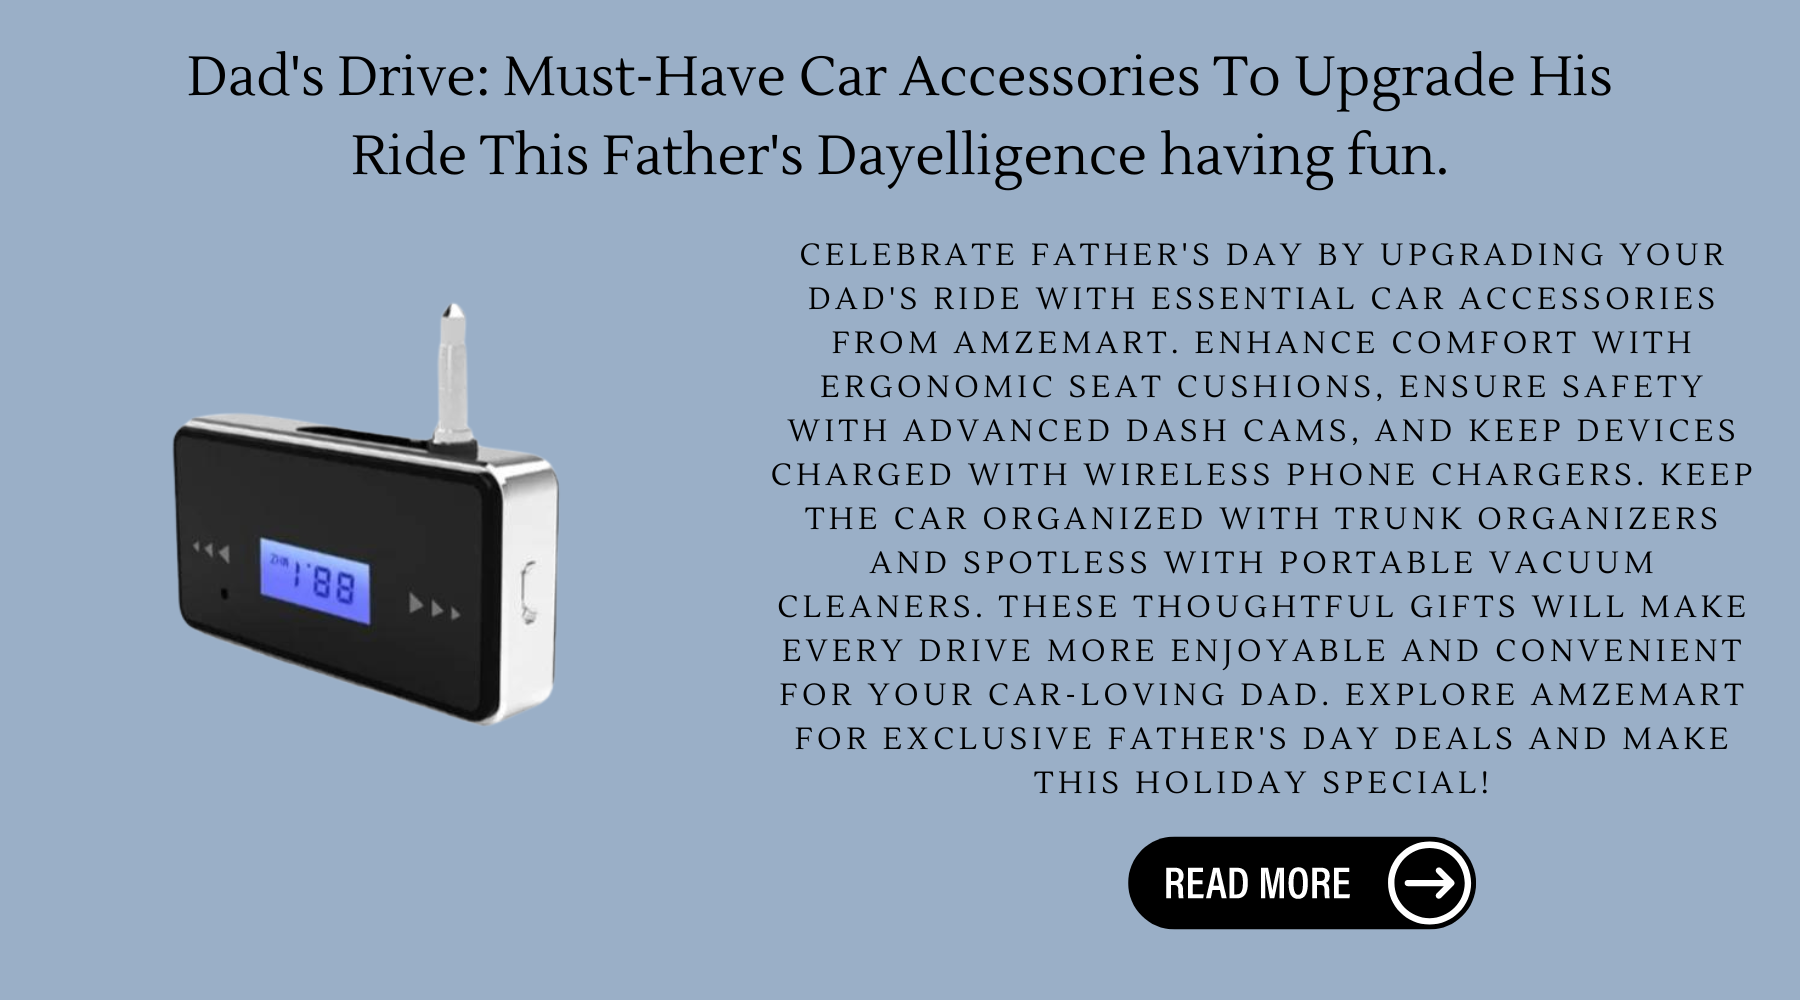 Dad's Drive: Must-Have Car Accessories To Upgrade His Ride This Father's Day